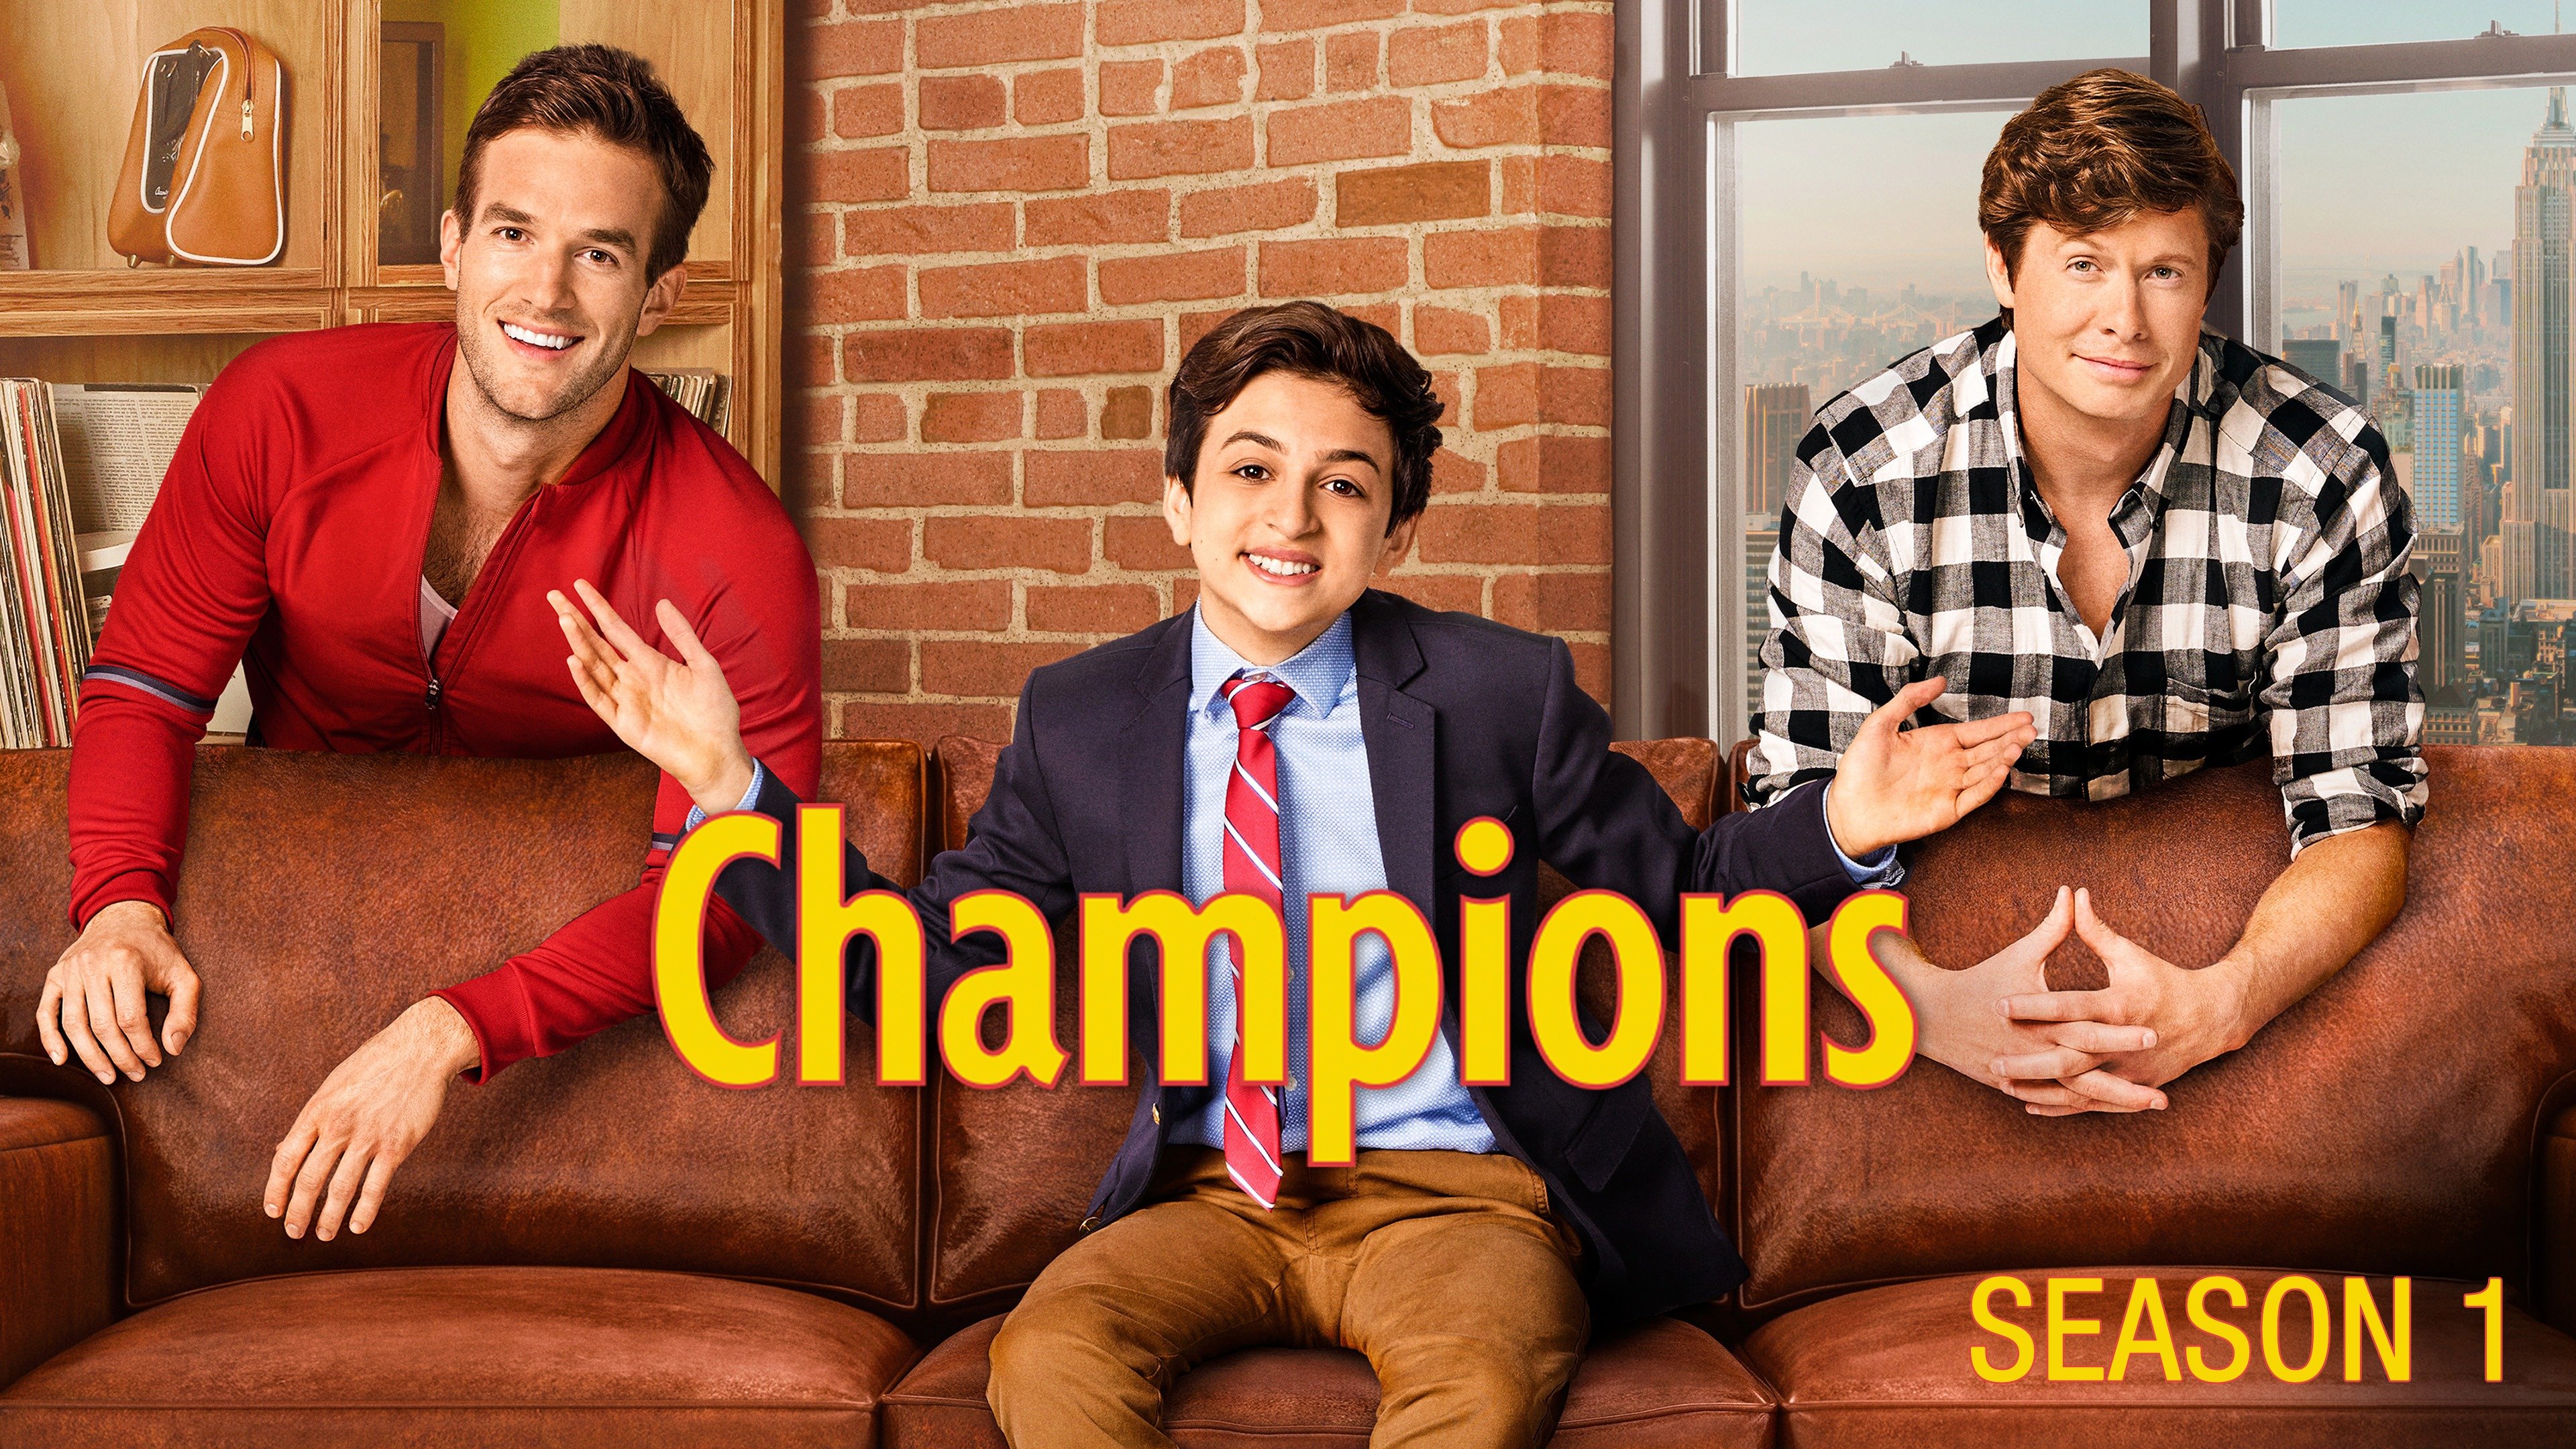 Mindy Kaling Movies And Series: Champions